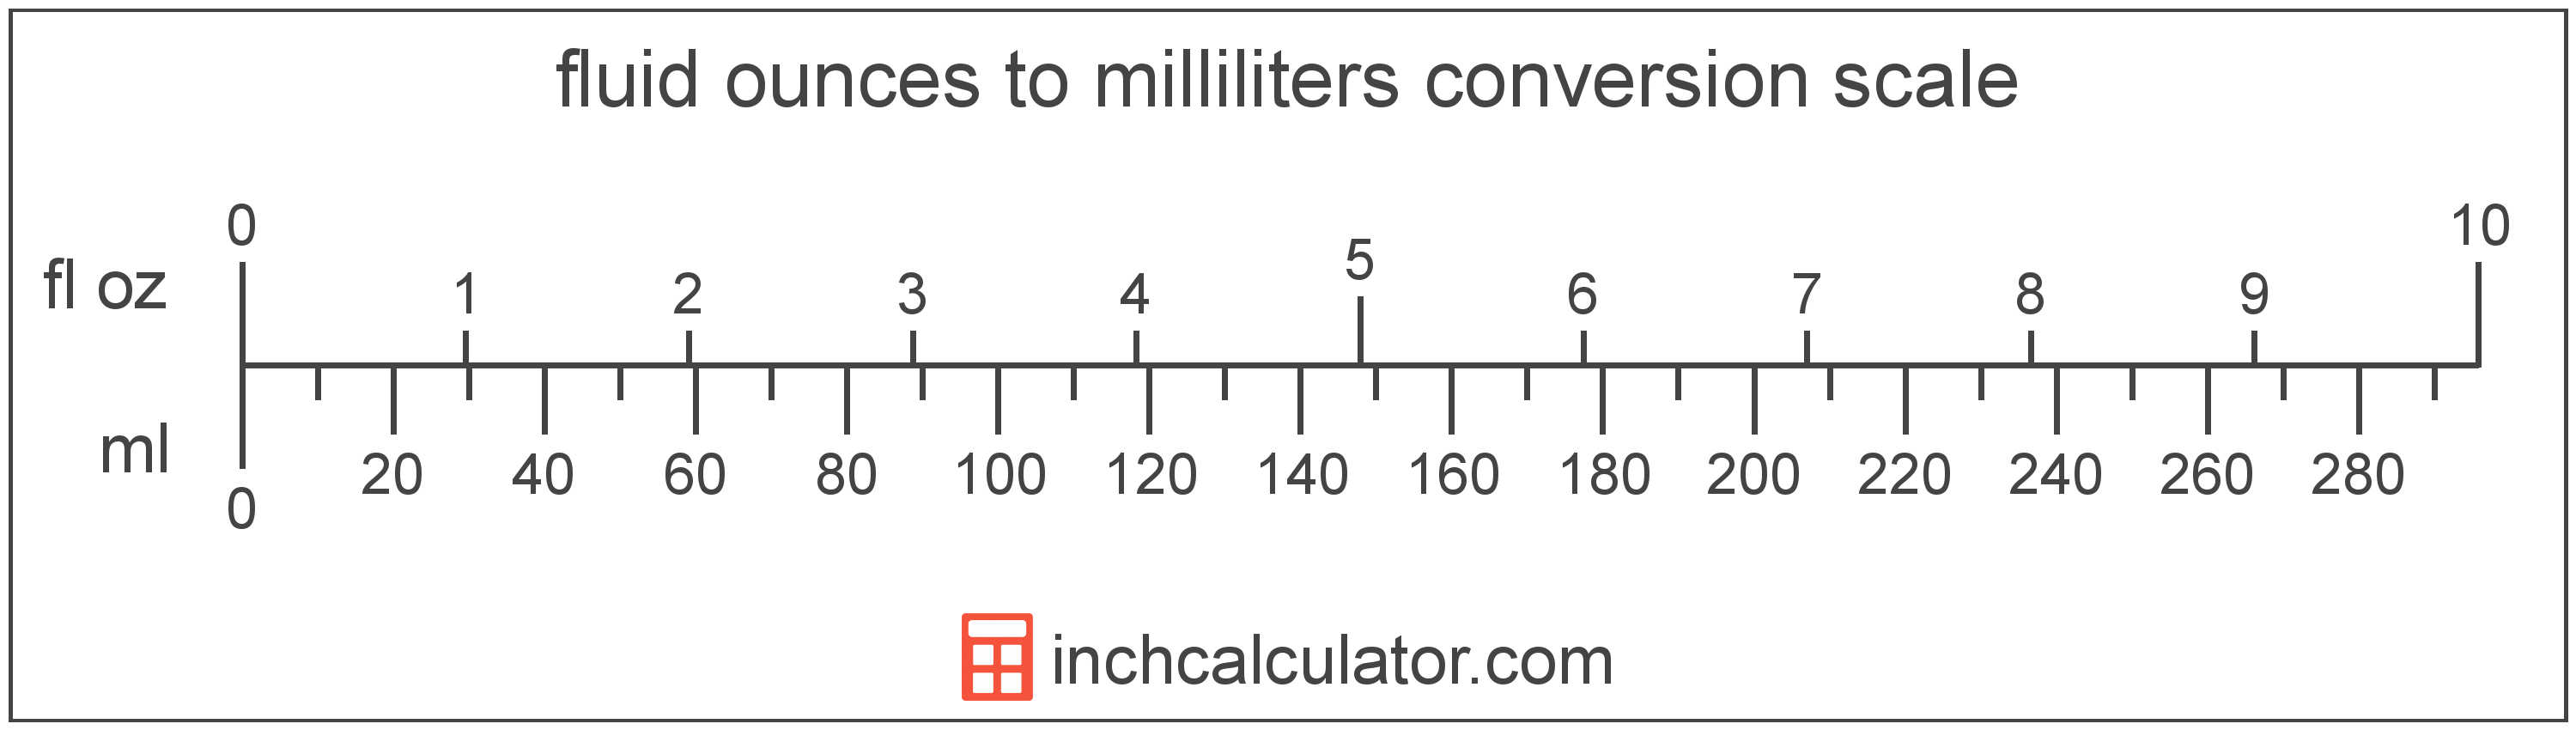 conversion scale showing milliliters and equivalent fluid ounces volume values